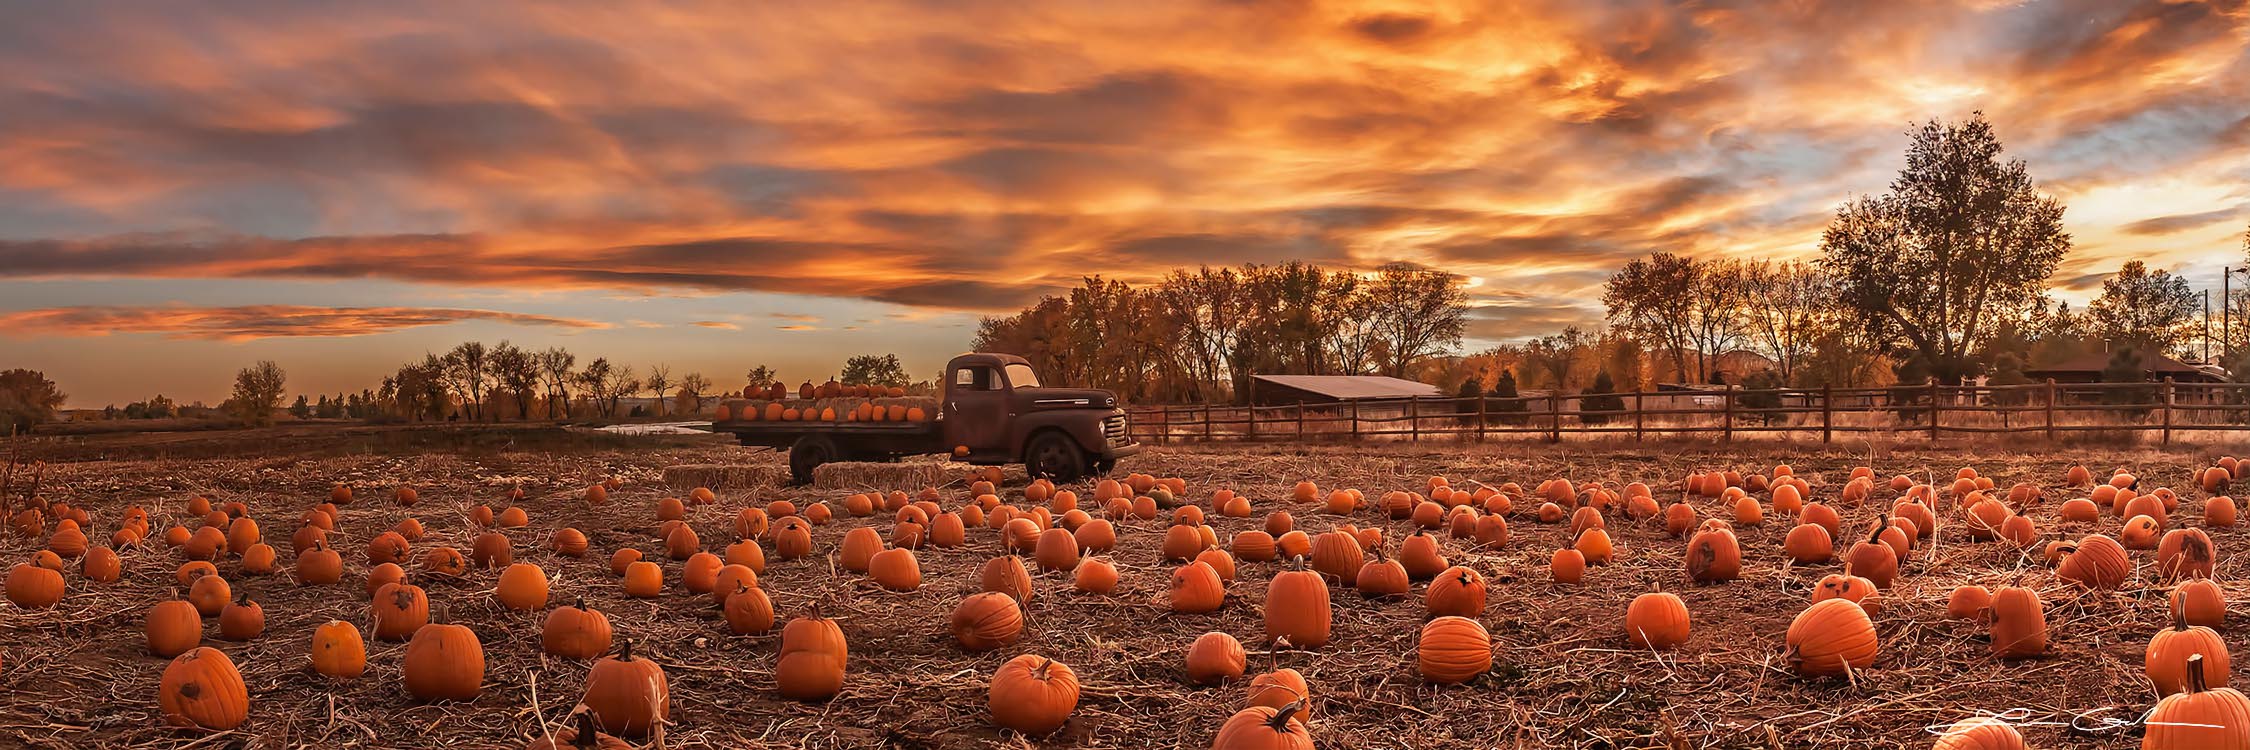 A field of pumpkins and an old truck under beautiful dramatic sunset clouds and skies